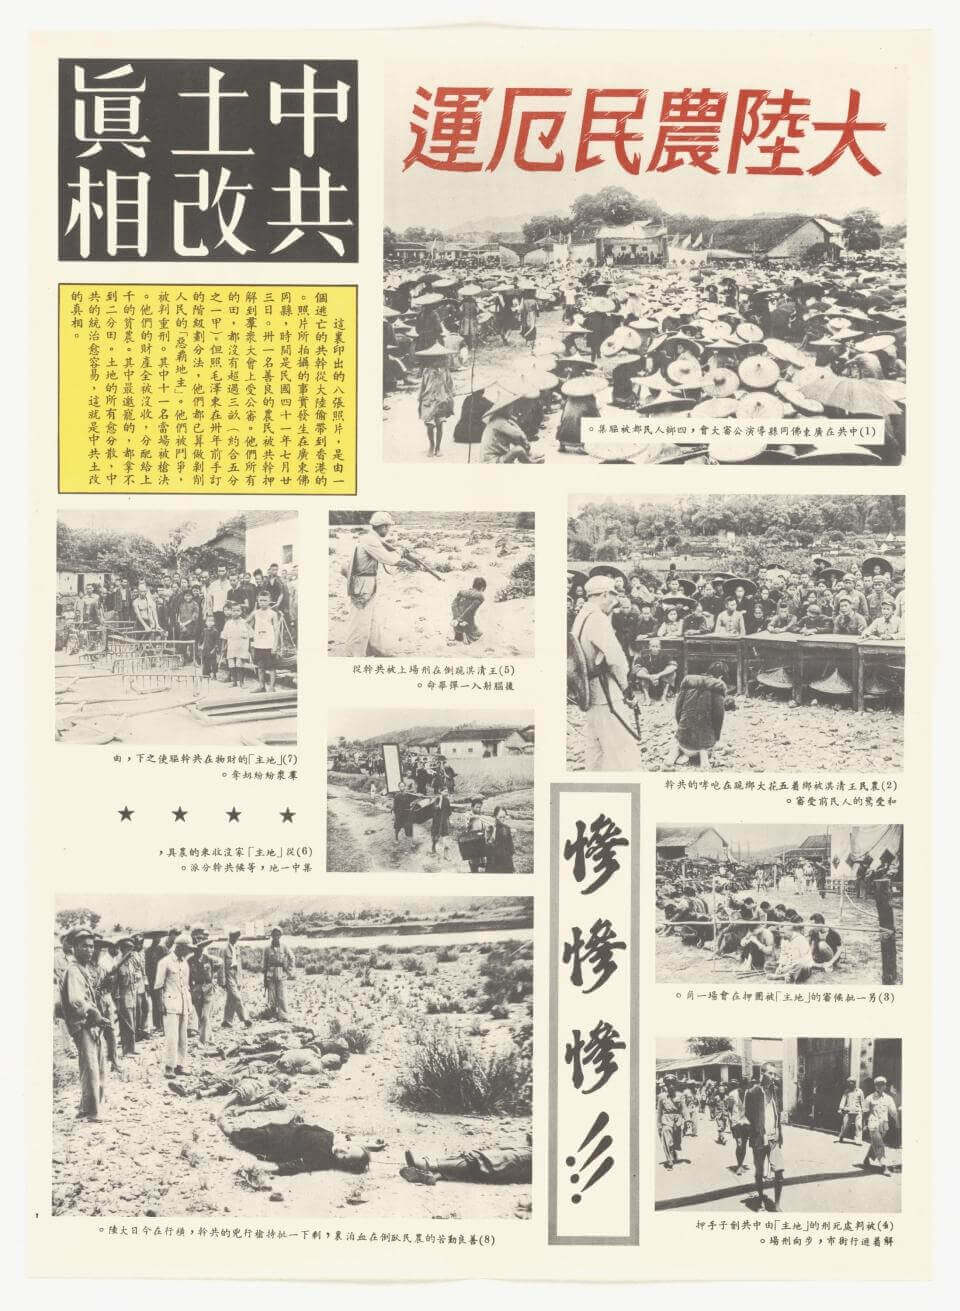 A newspaper page entitled Real Story of Red China Land Reform